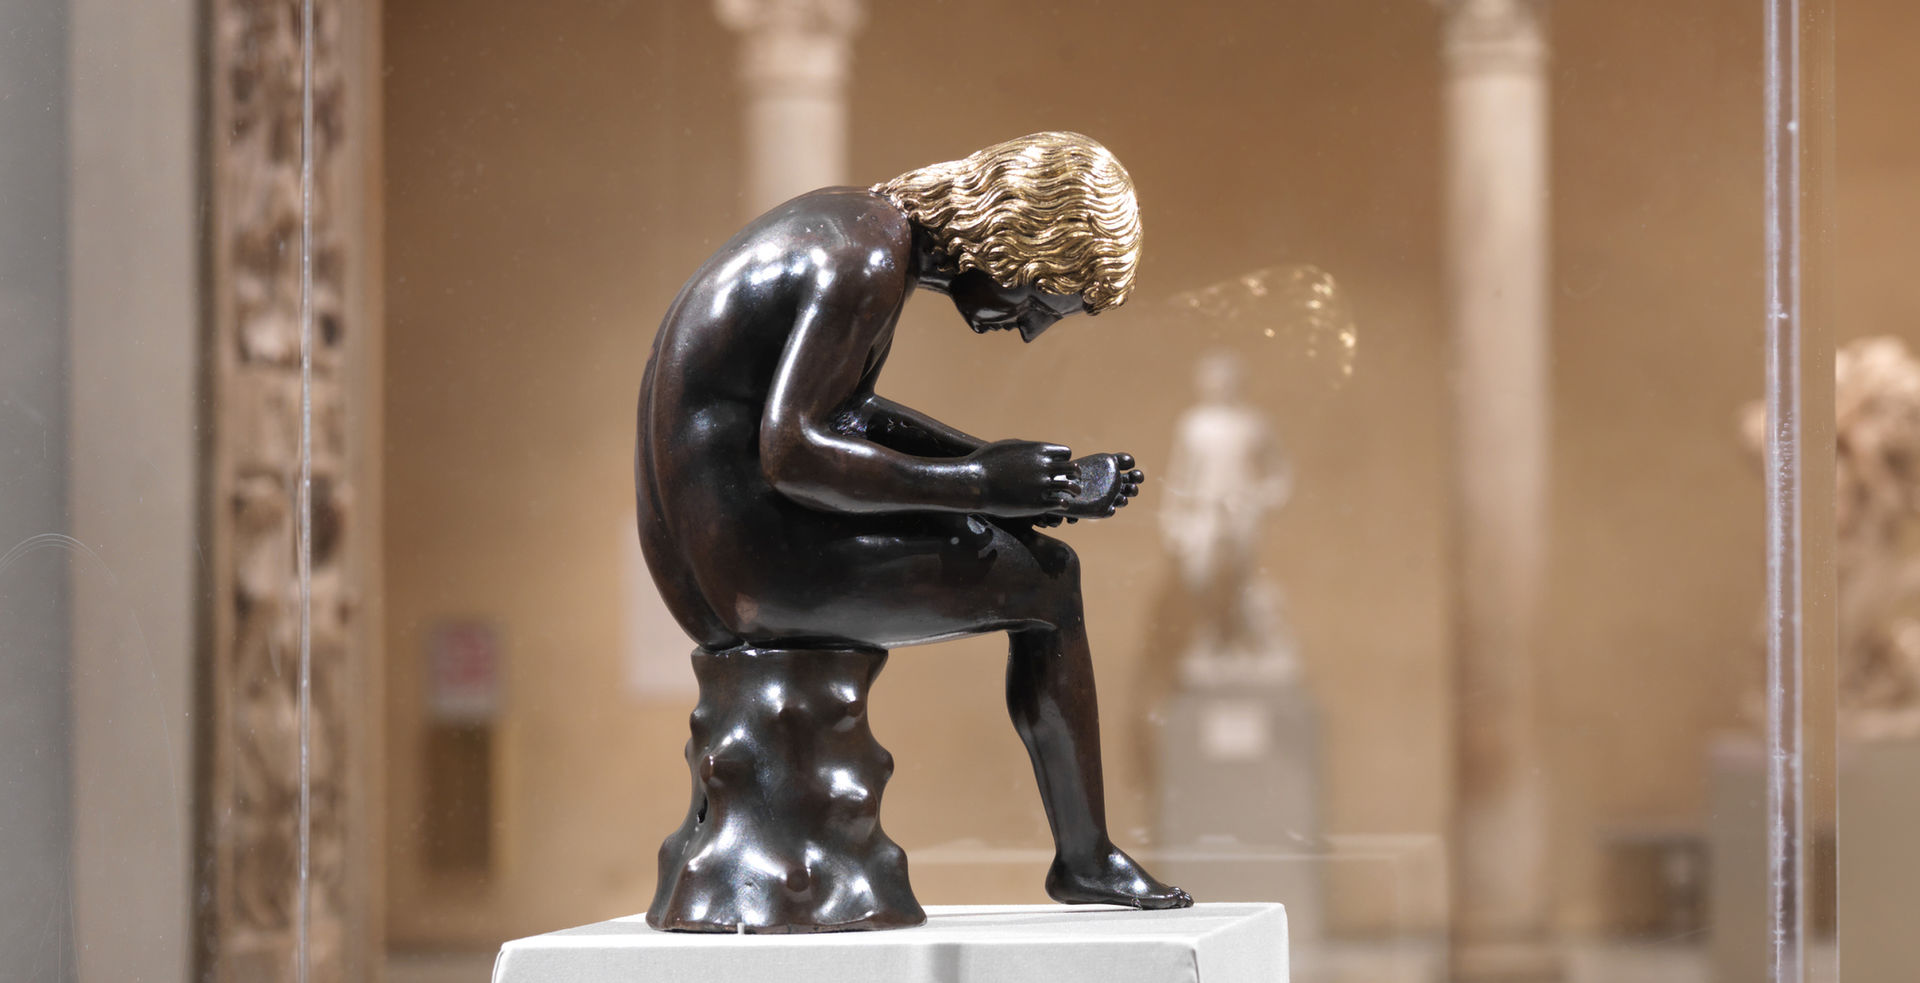 A small bronze sculpture of a seated boy pulling a thorn from the bottom of his foot appears within a display case at The Metropolitan Museum of Art; the figure hunches over looking intently at the bottom of his foot; the sculpture is set against the warm walls and limestone columns of the against gallery in the distance.